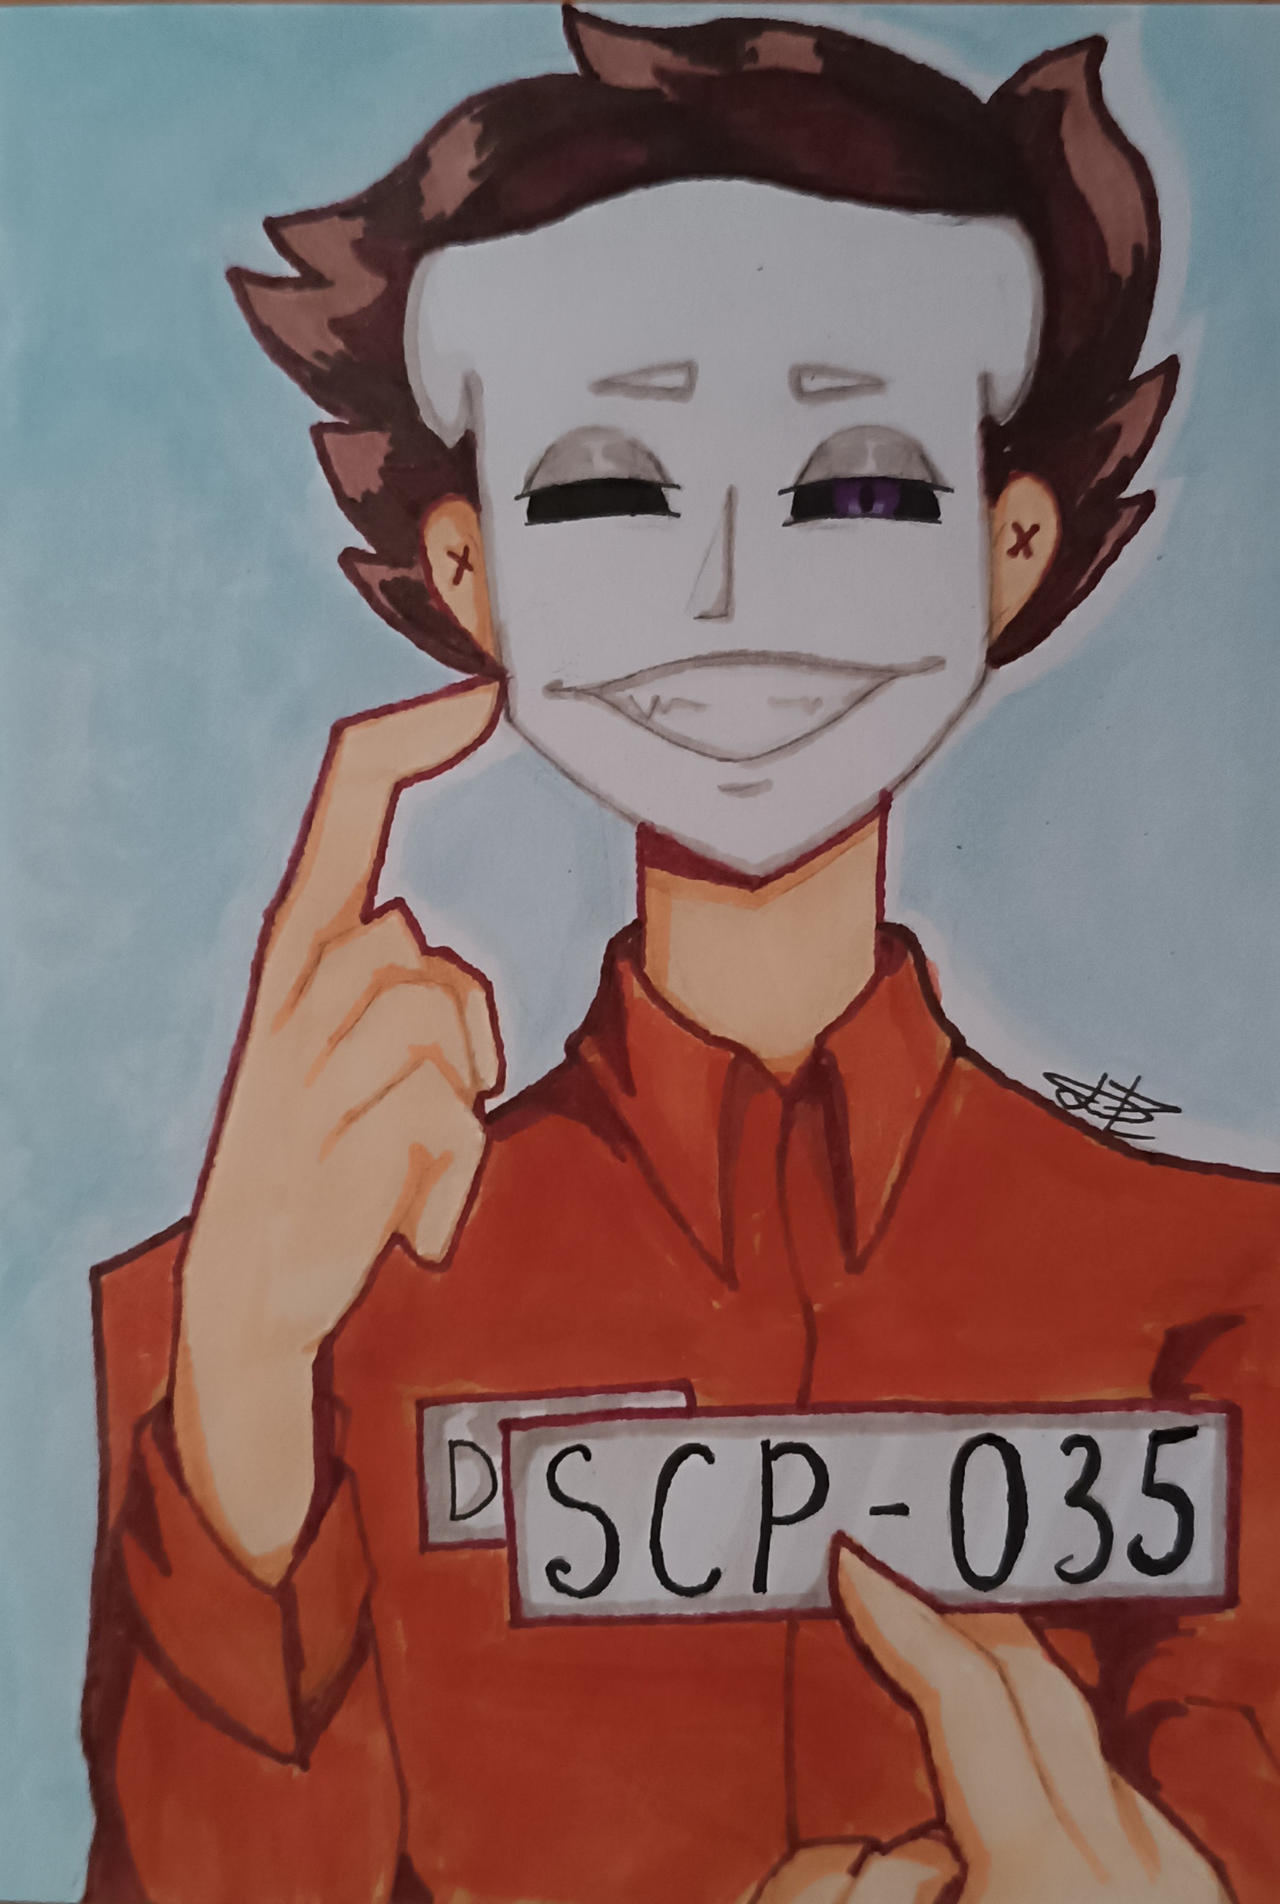 SCP - 035 - whoops there goes my leg by IndoorsCat on DeviantArt